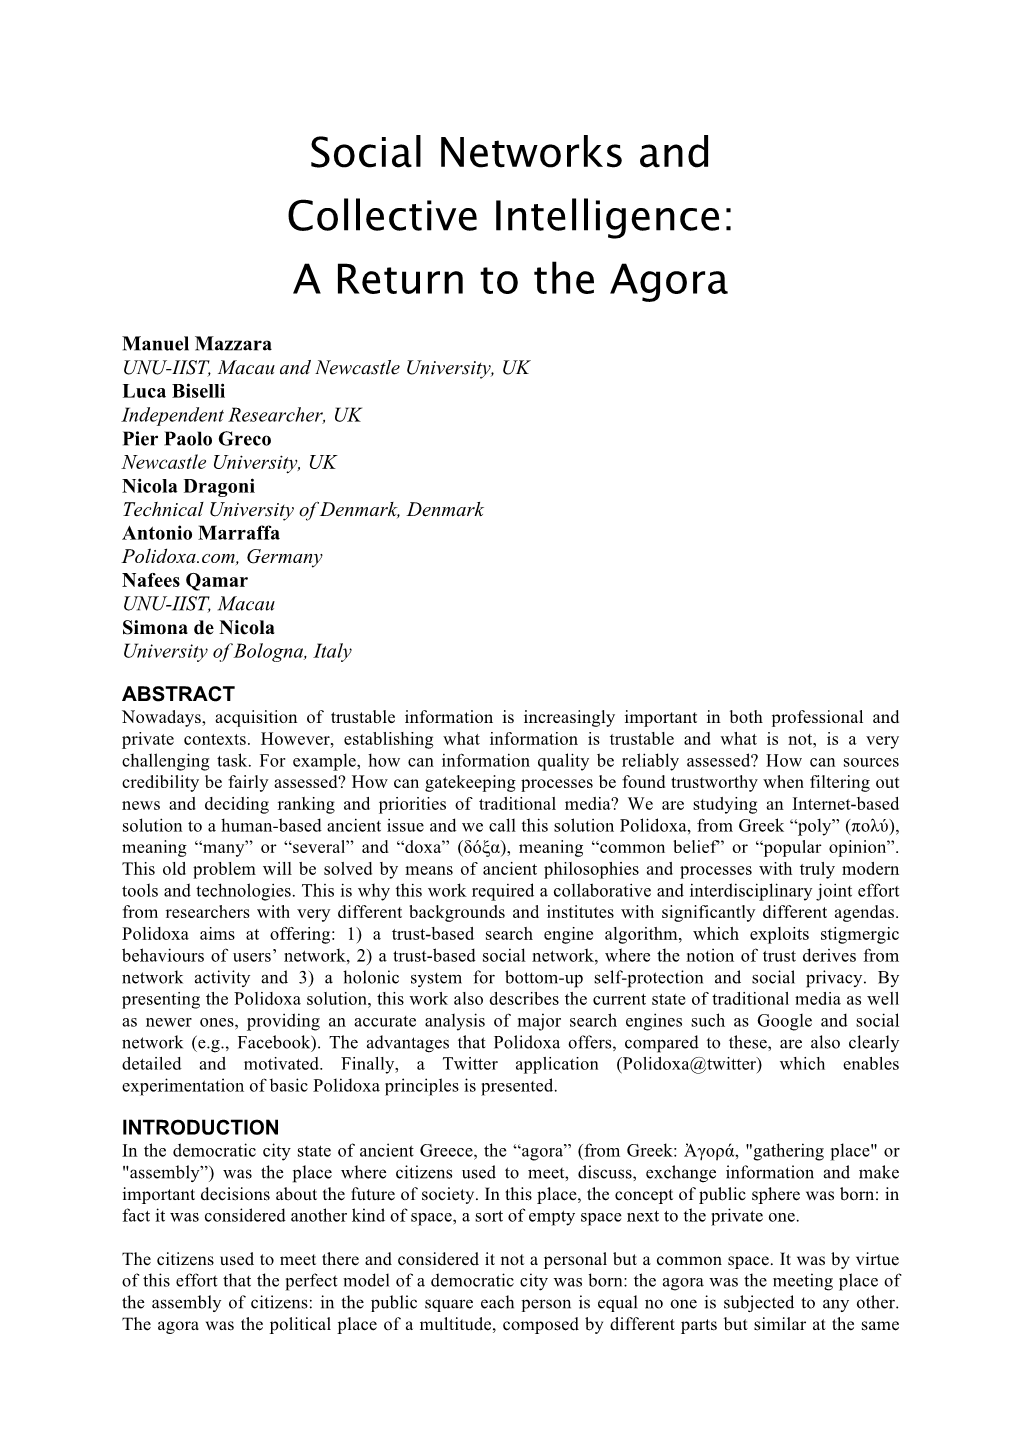 Social Networks and Collective Intelligence: a Return to the Agora